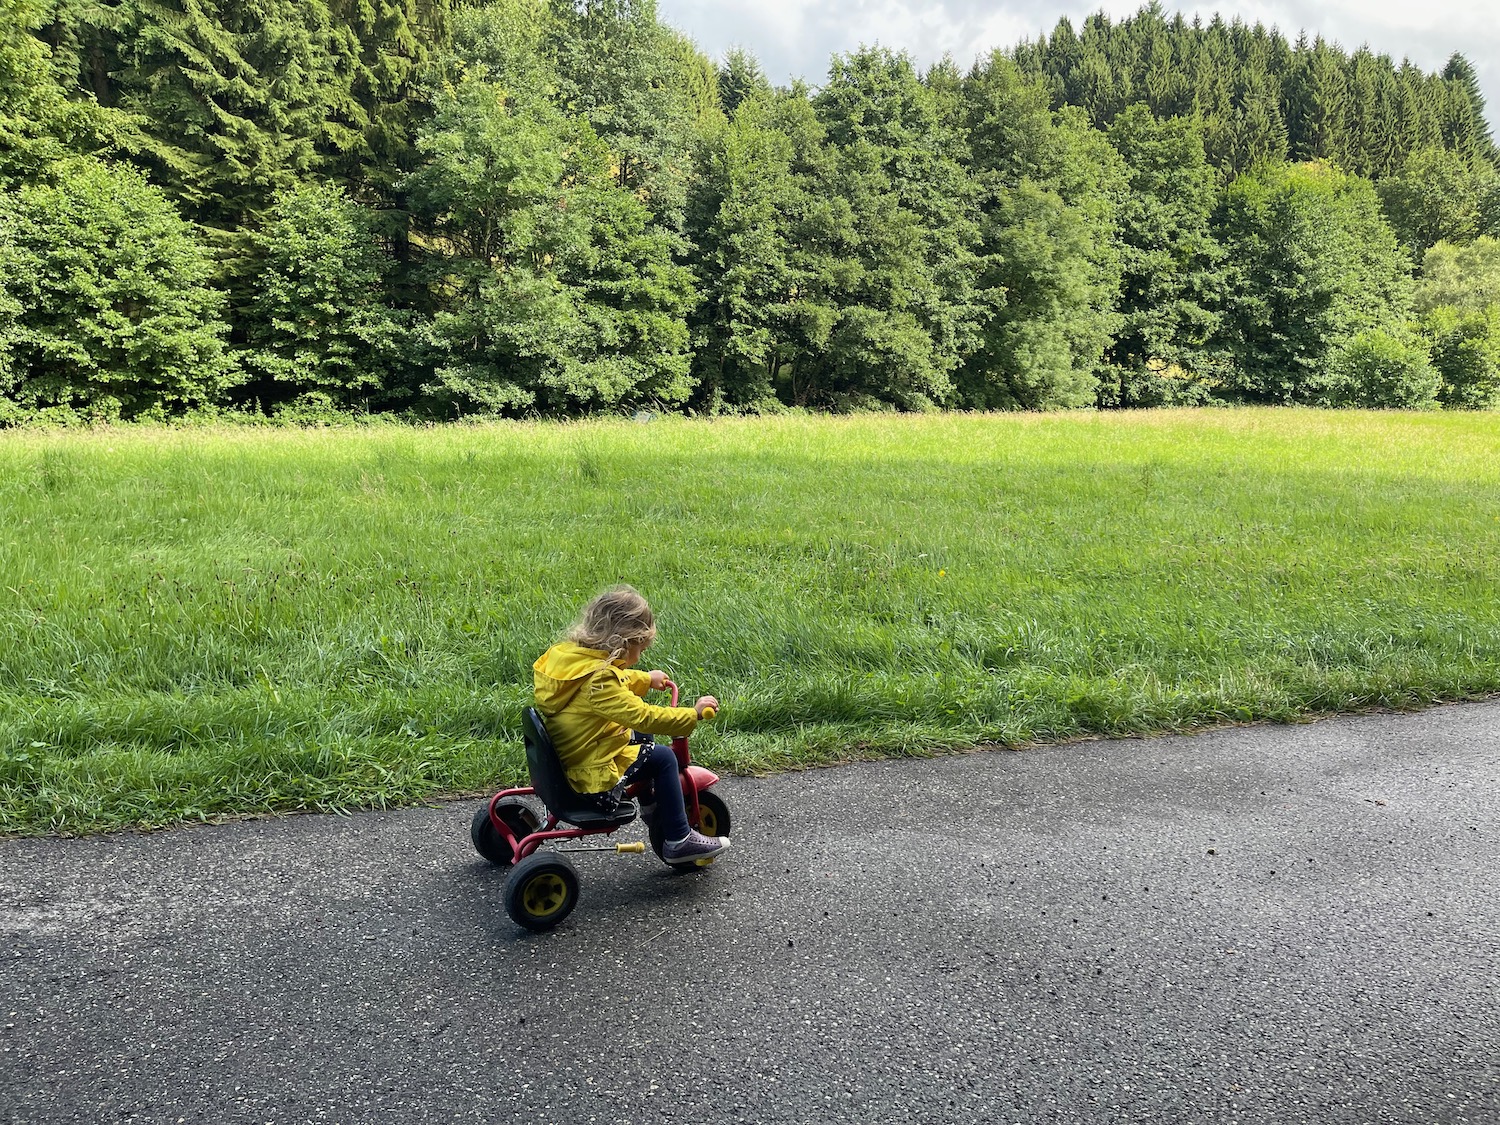 a child riding a tricycle on a path with grass and trees in the background